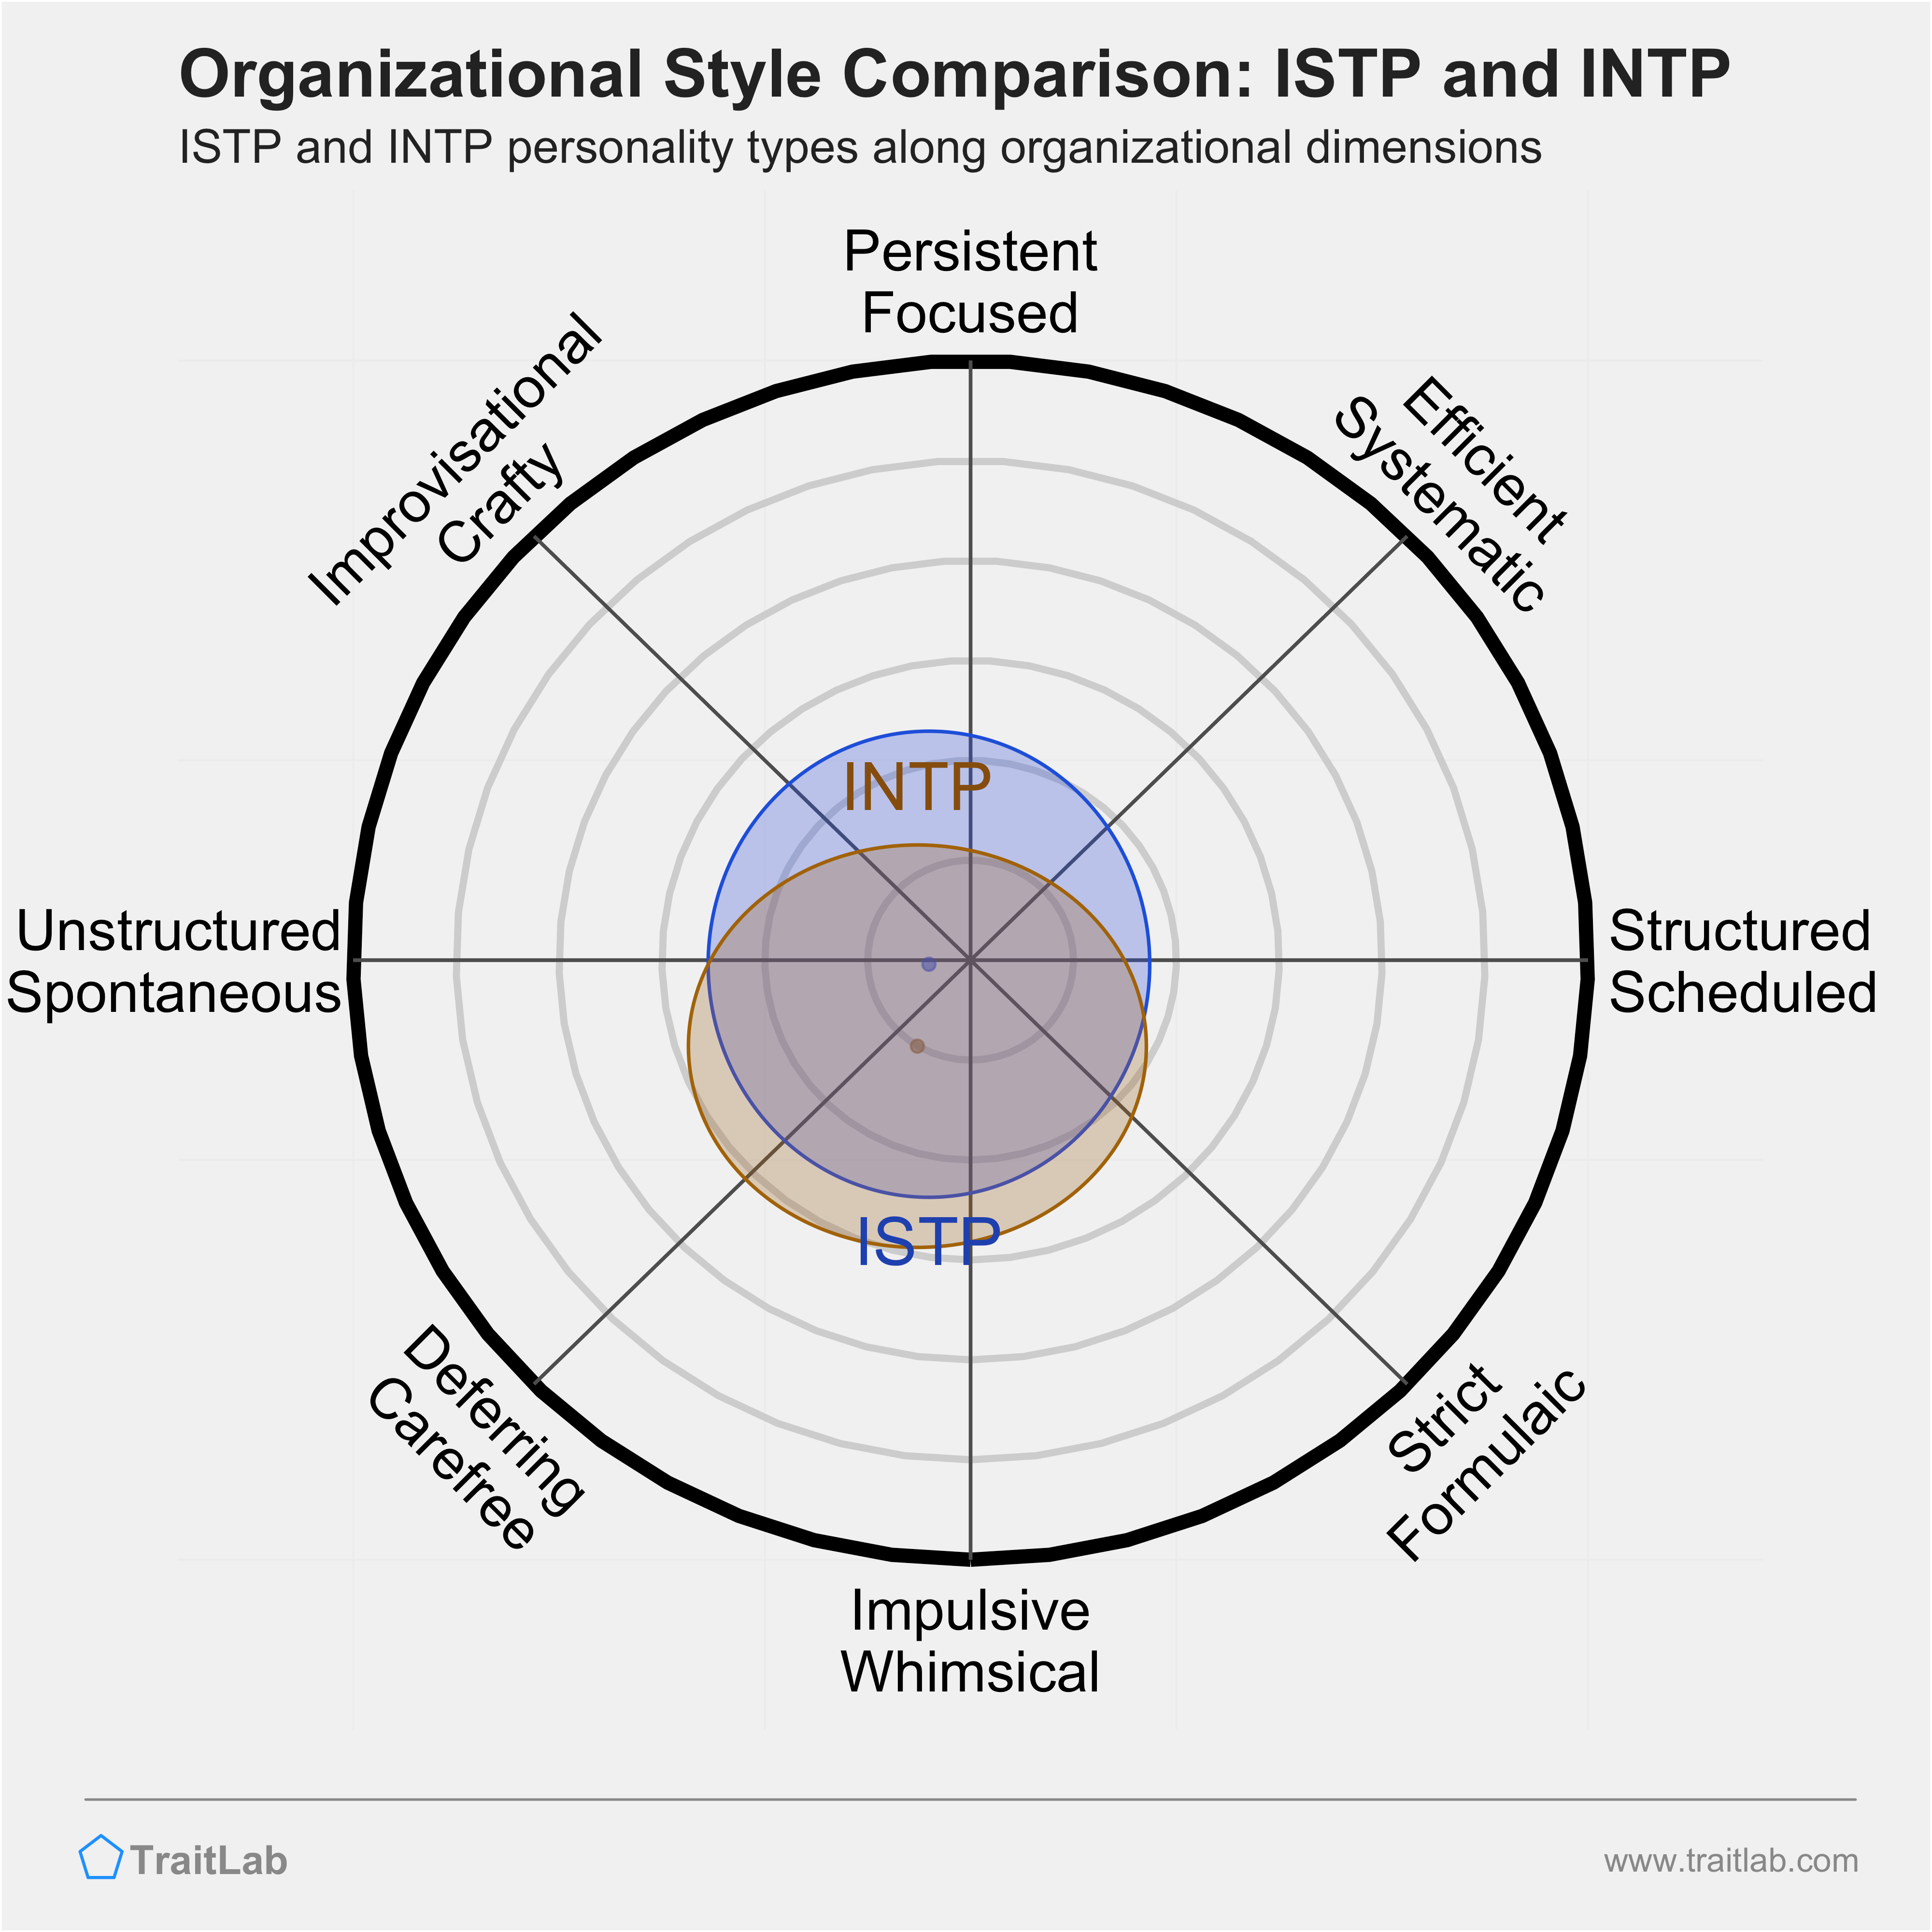 ISTP and INTP comparison across organizational dimensions